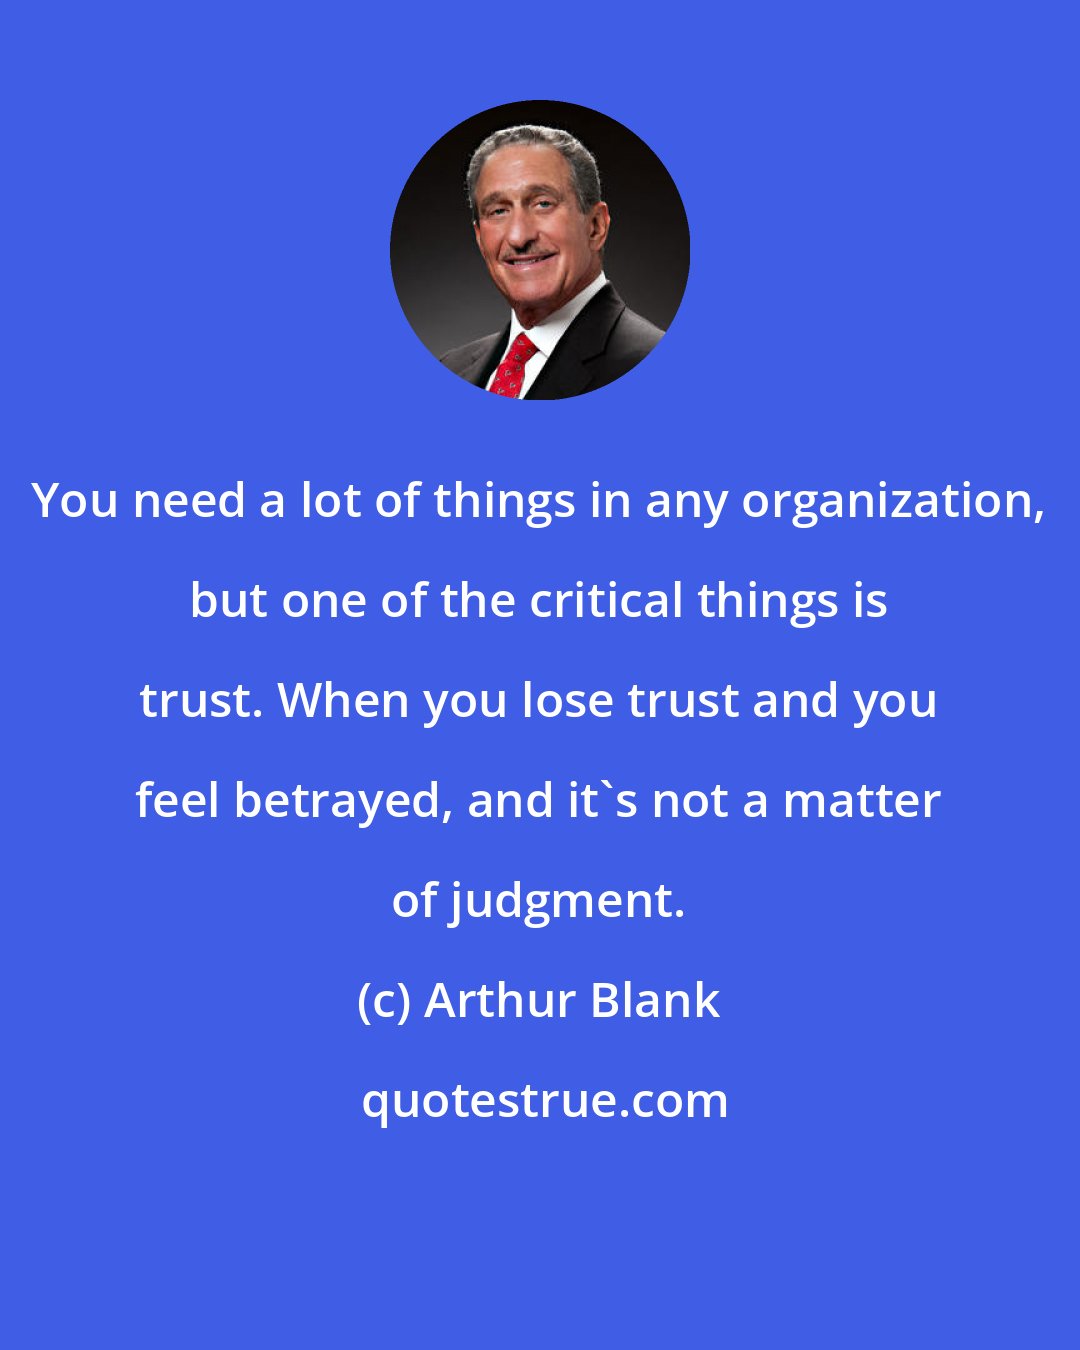 Arthur Blank: You need a lot of things in any organization, but one of the critical things is trust. When you lose trust and you feel betrayed, and it's not a matter of judgment.